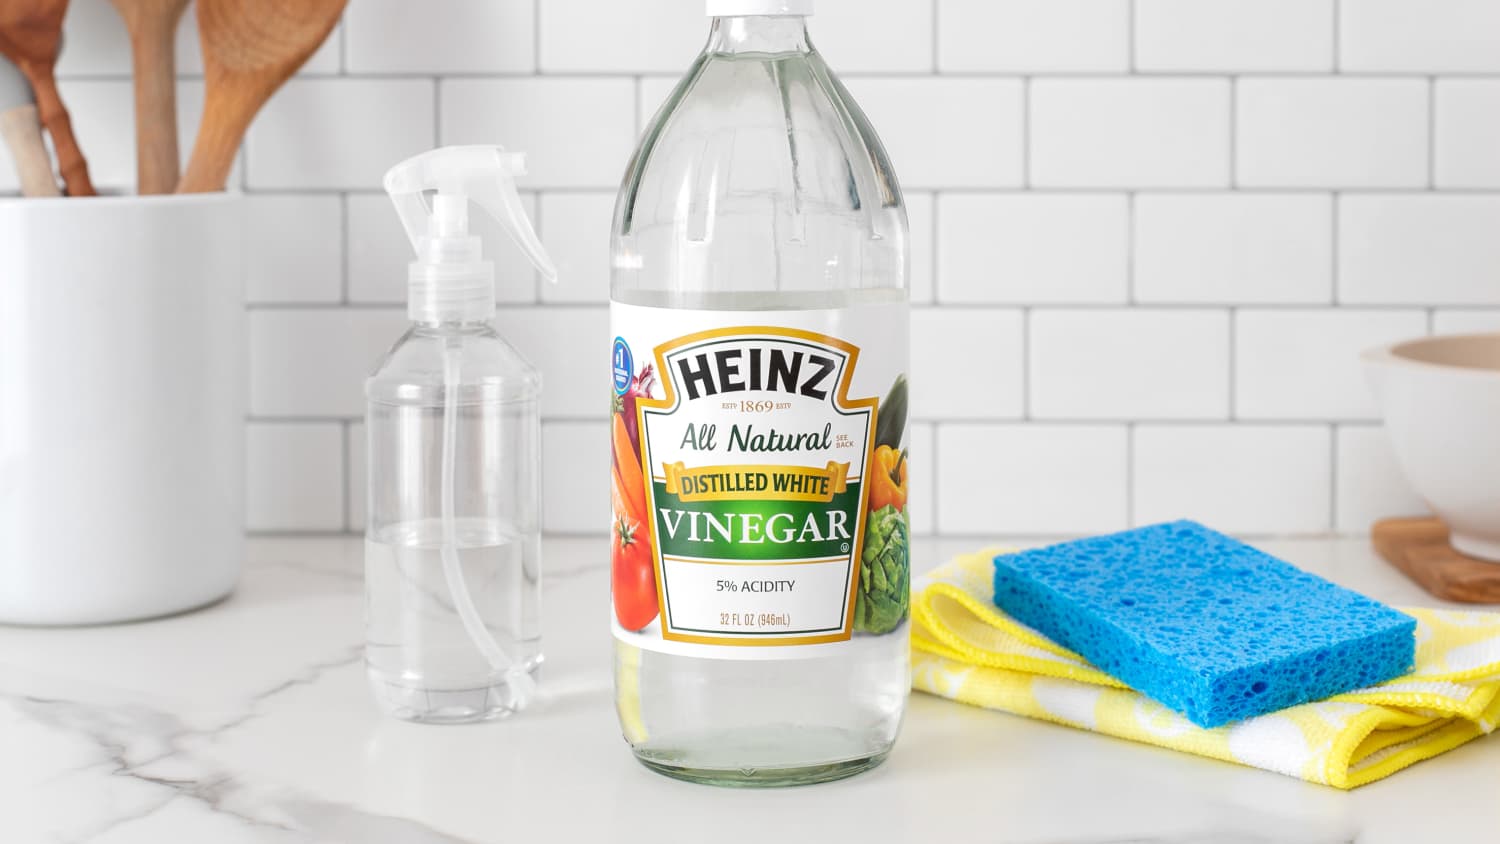 26 Household Uses for Vinegar, From Cleaning to Deodorizing